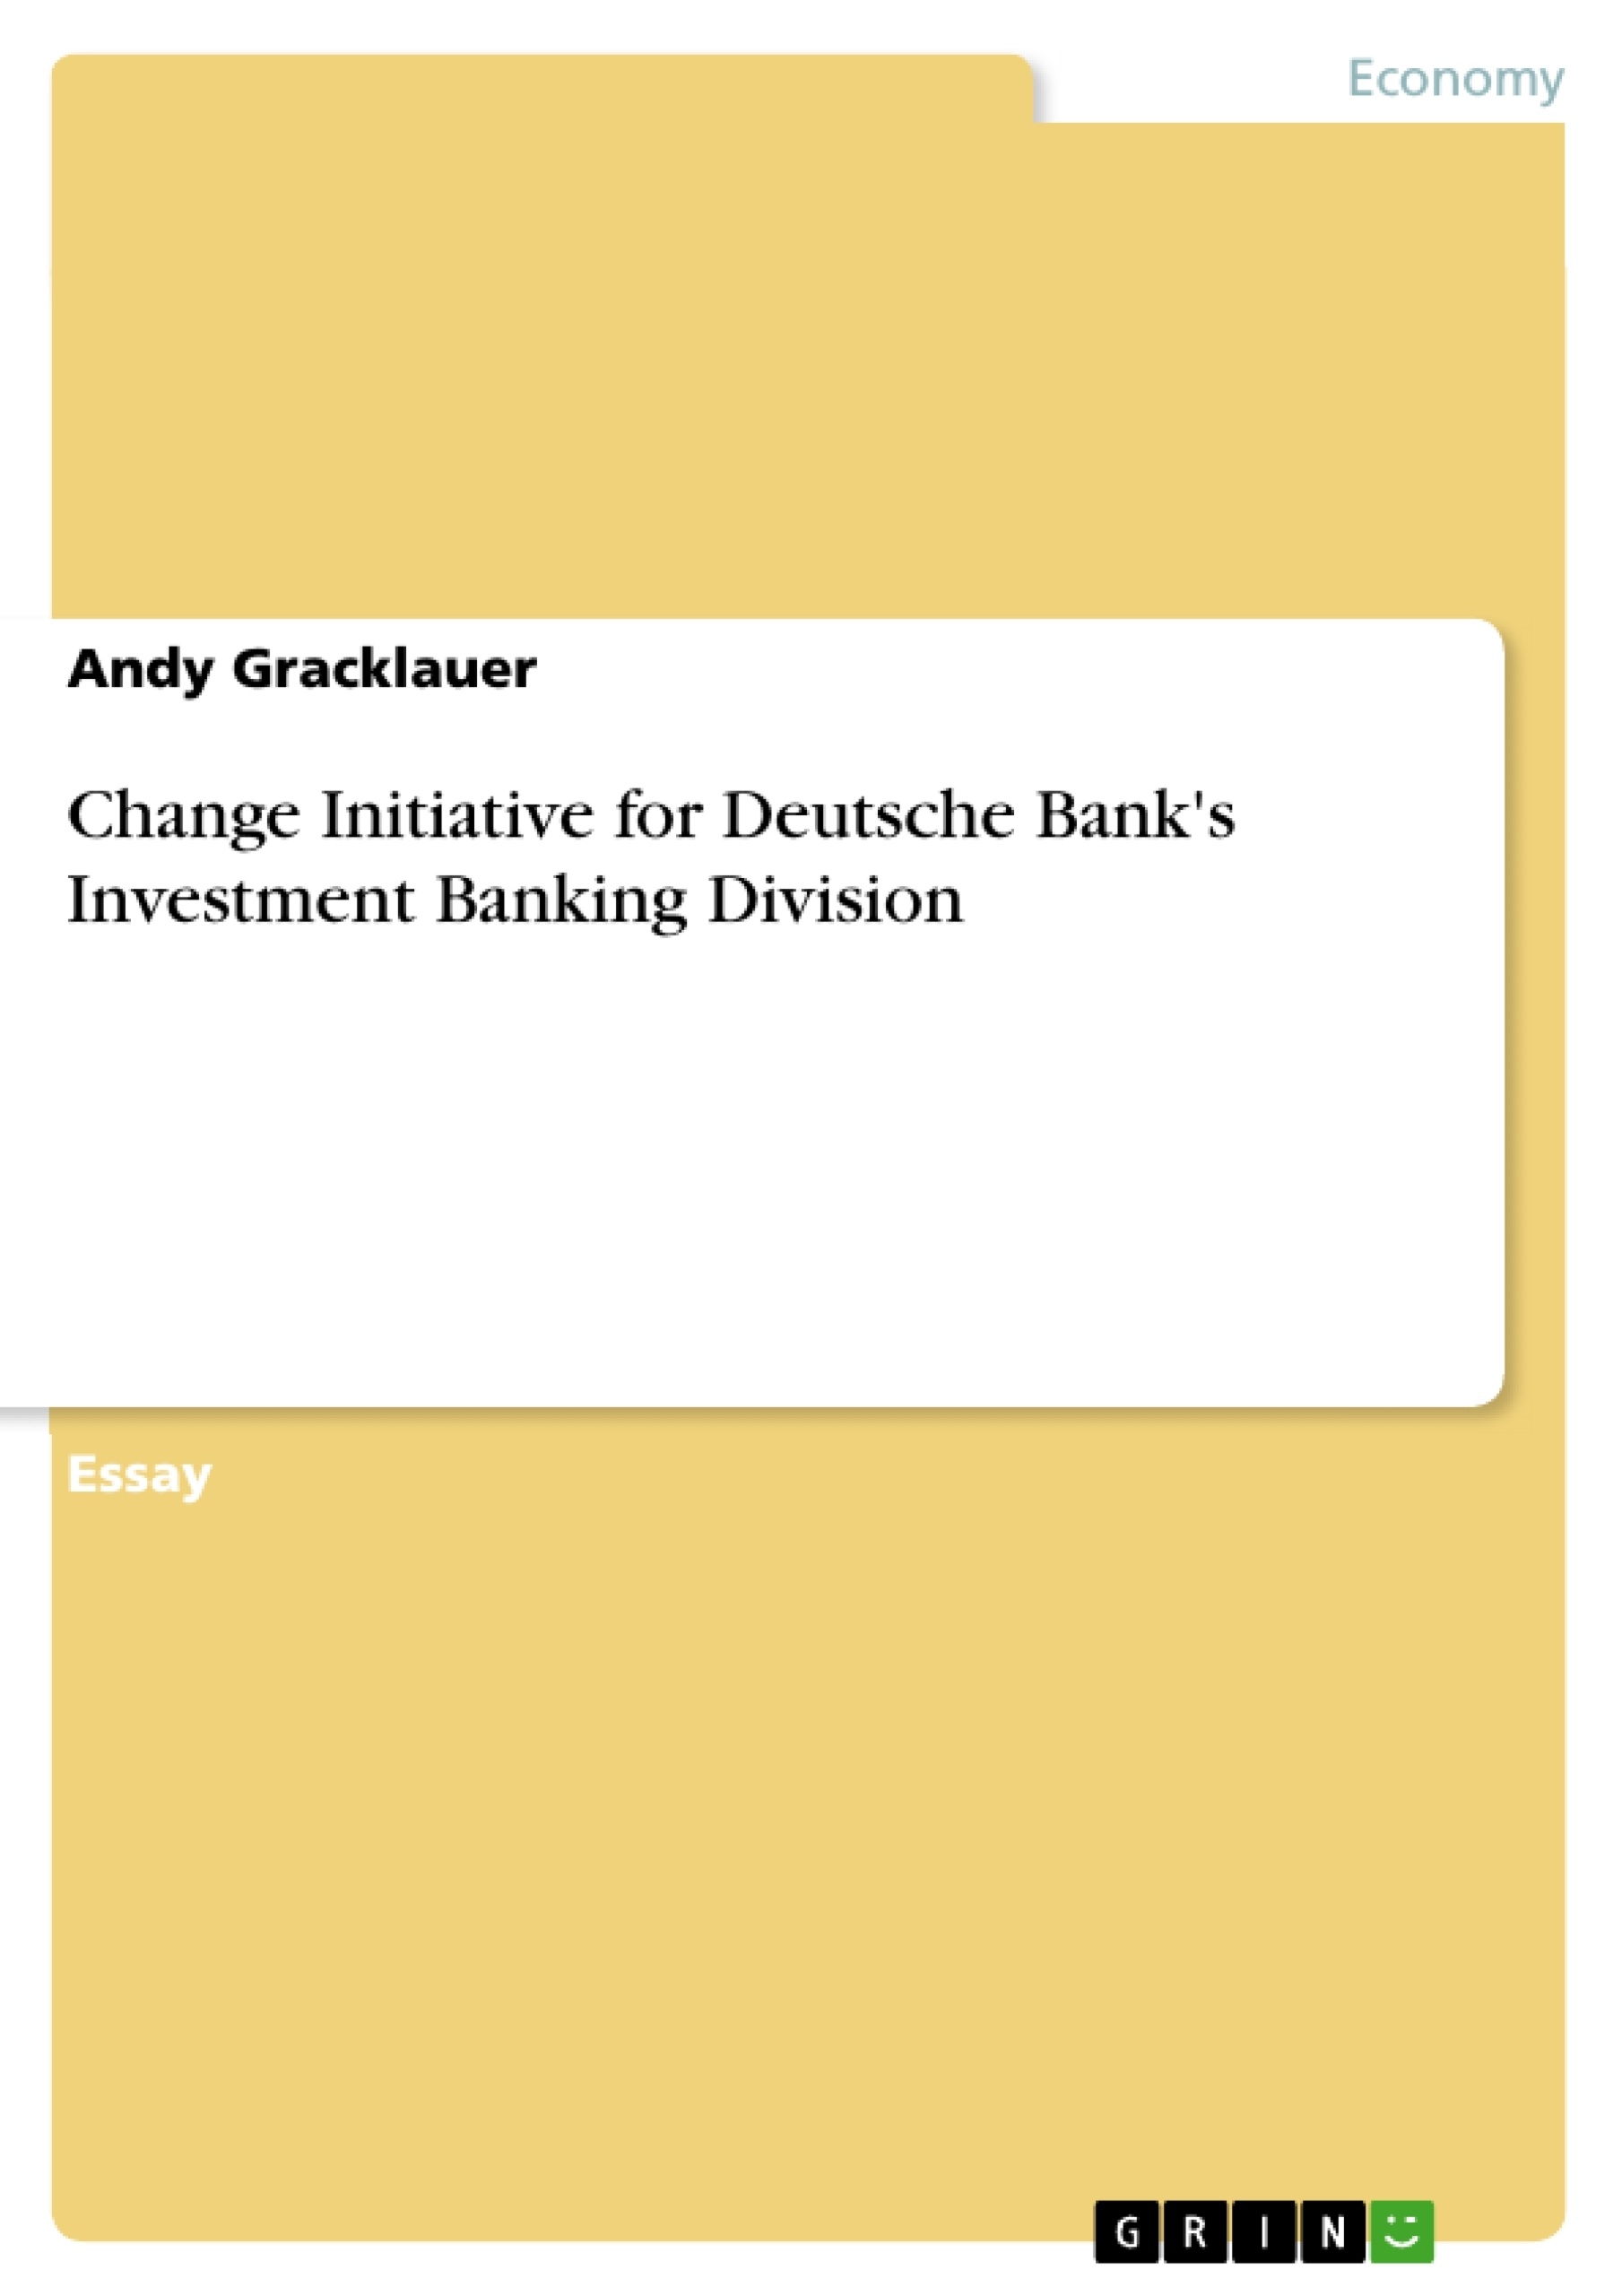 Title: Change Initiative for Deutsche Bank's Investment Banking Division